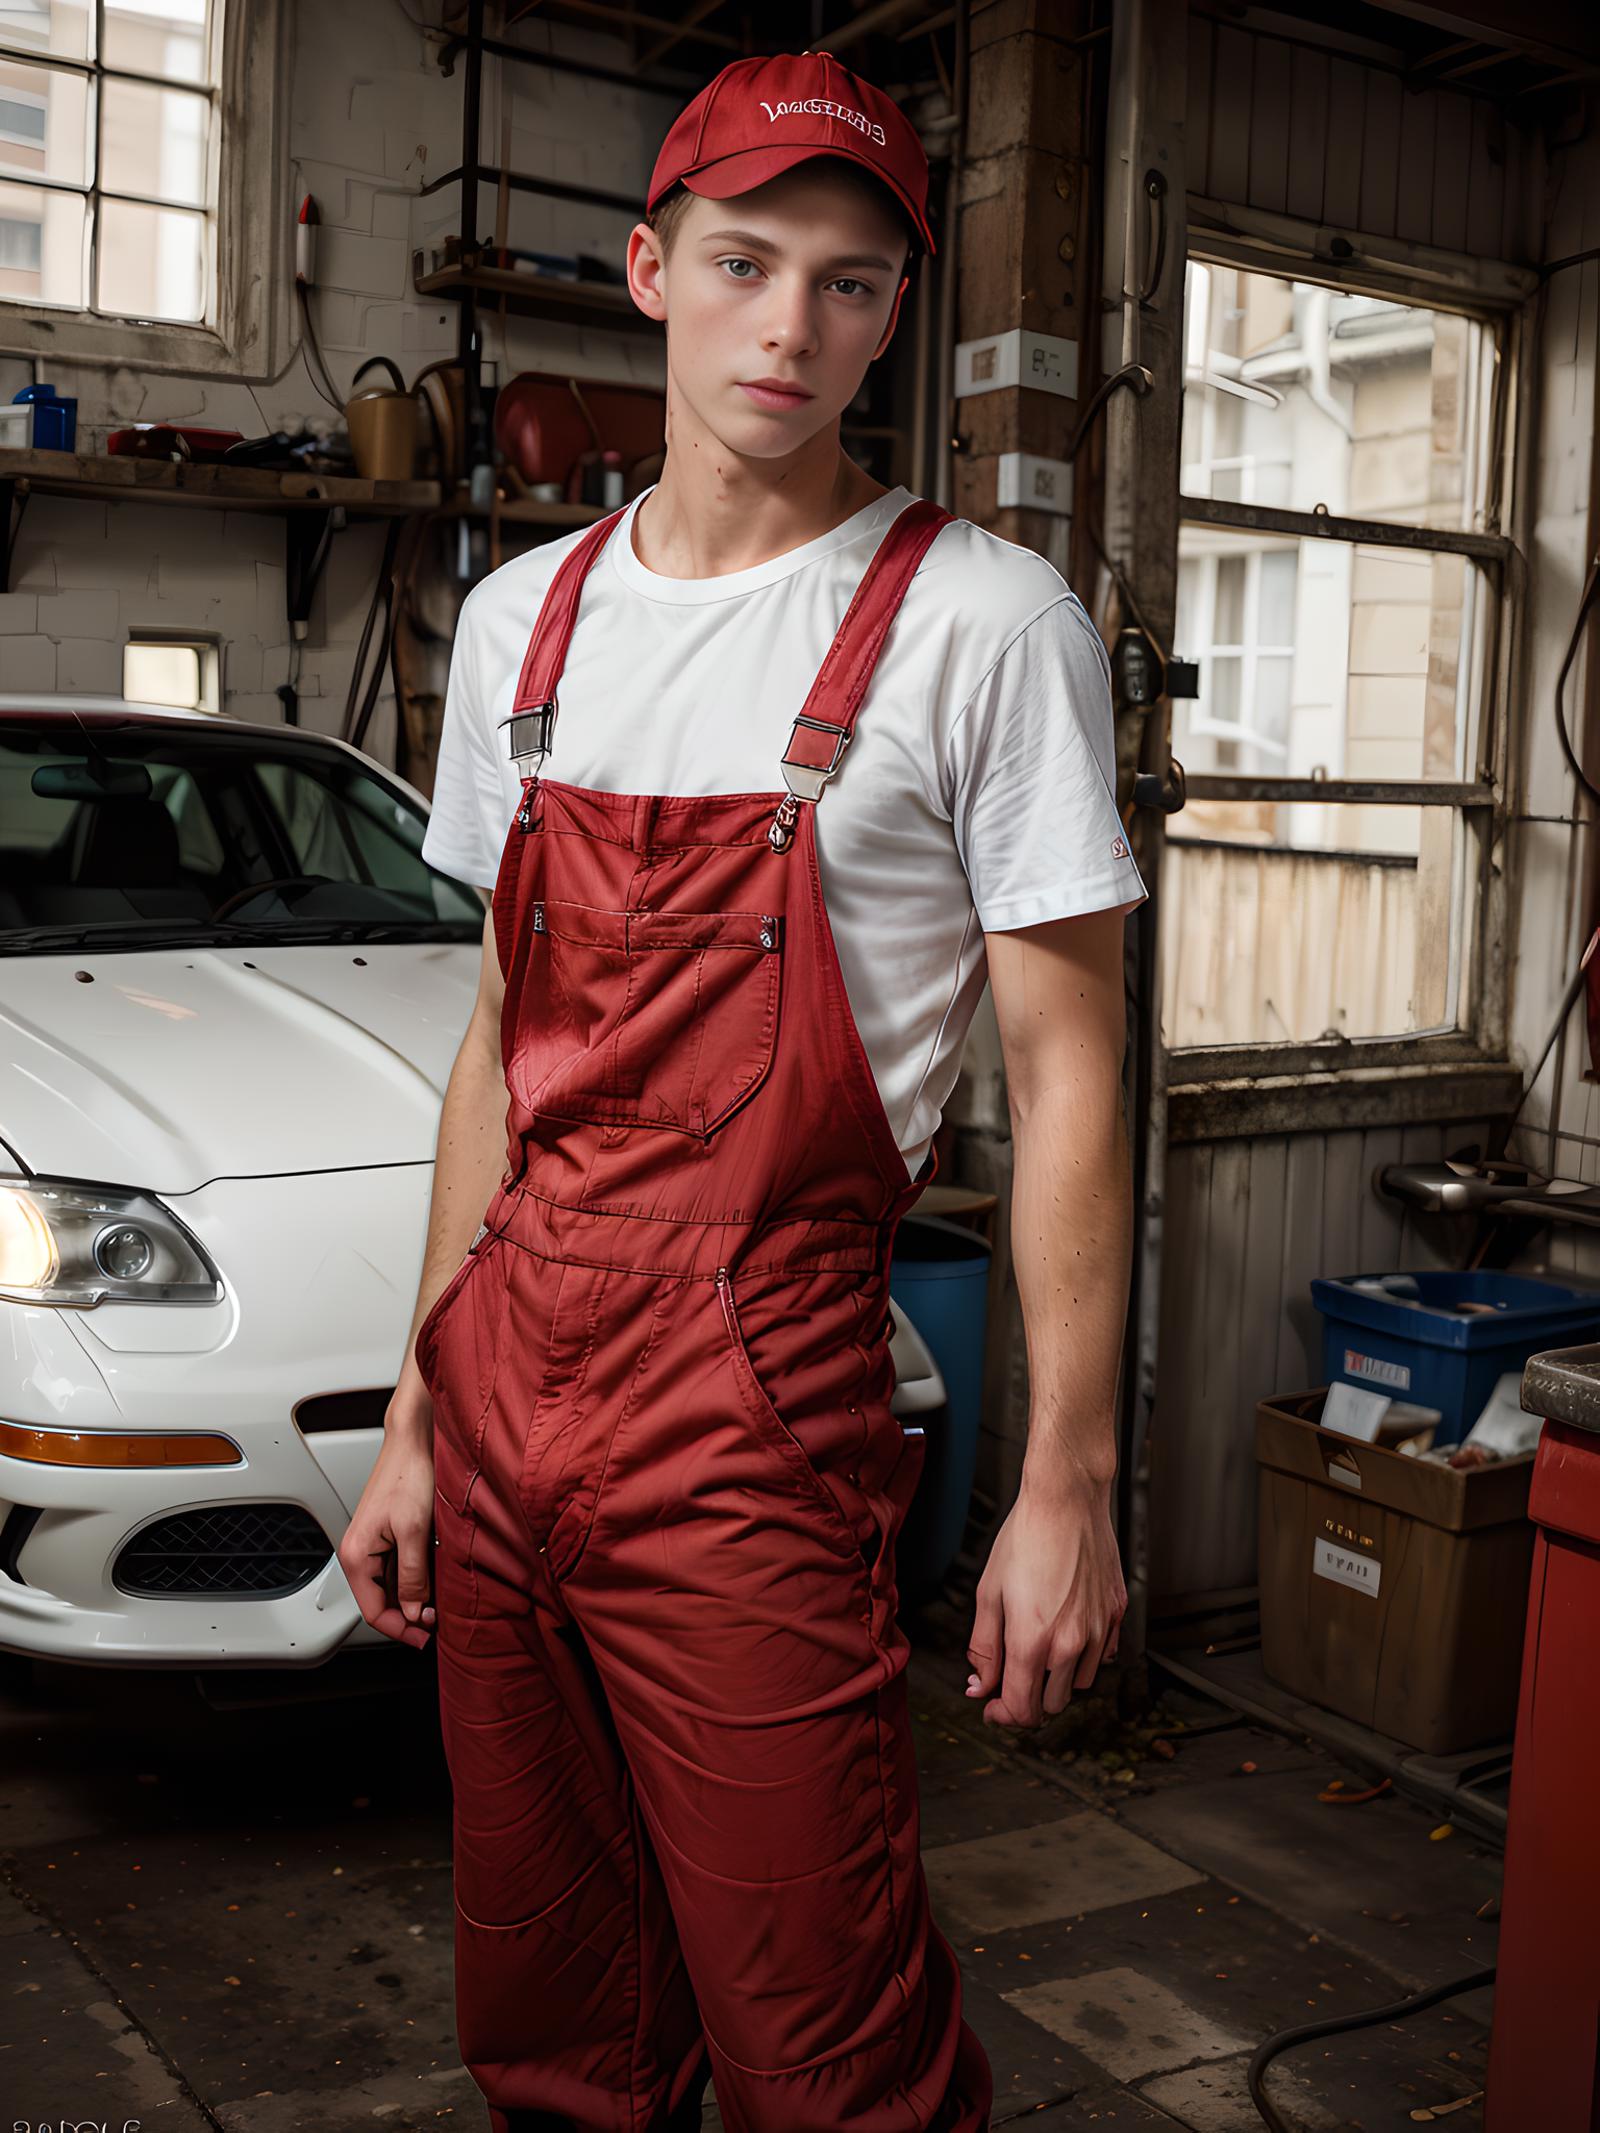 Sexy Mechanic Overalls image by stefan501